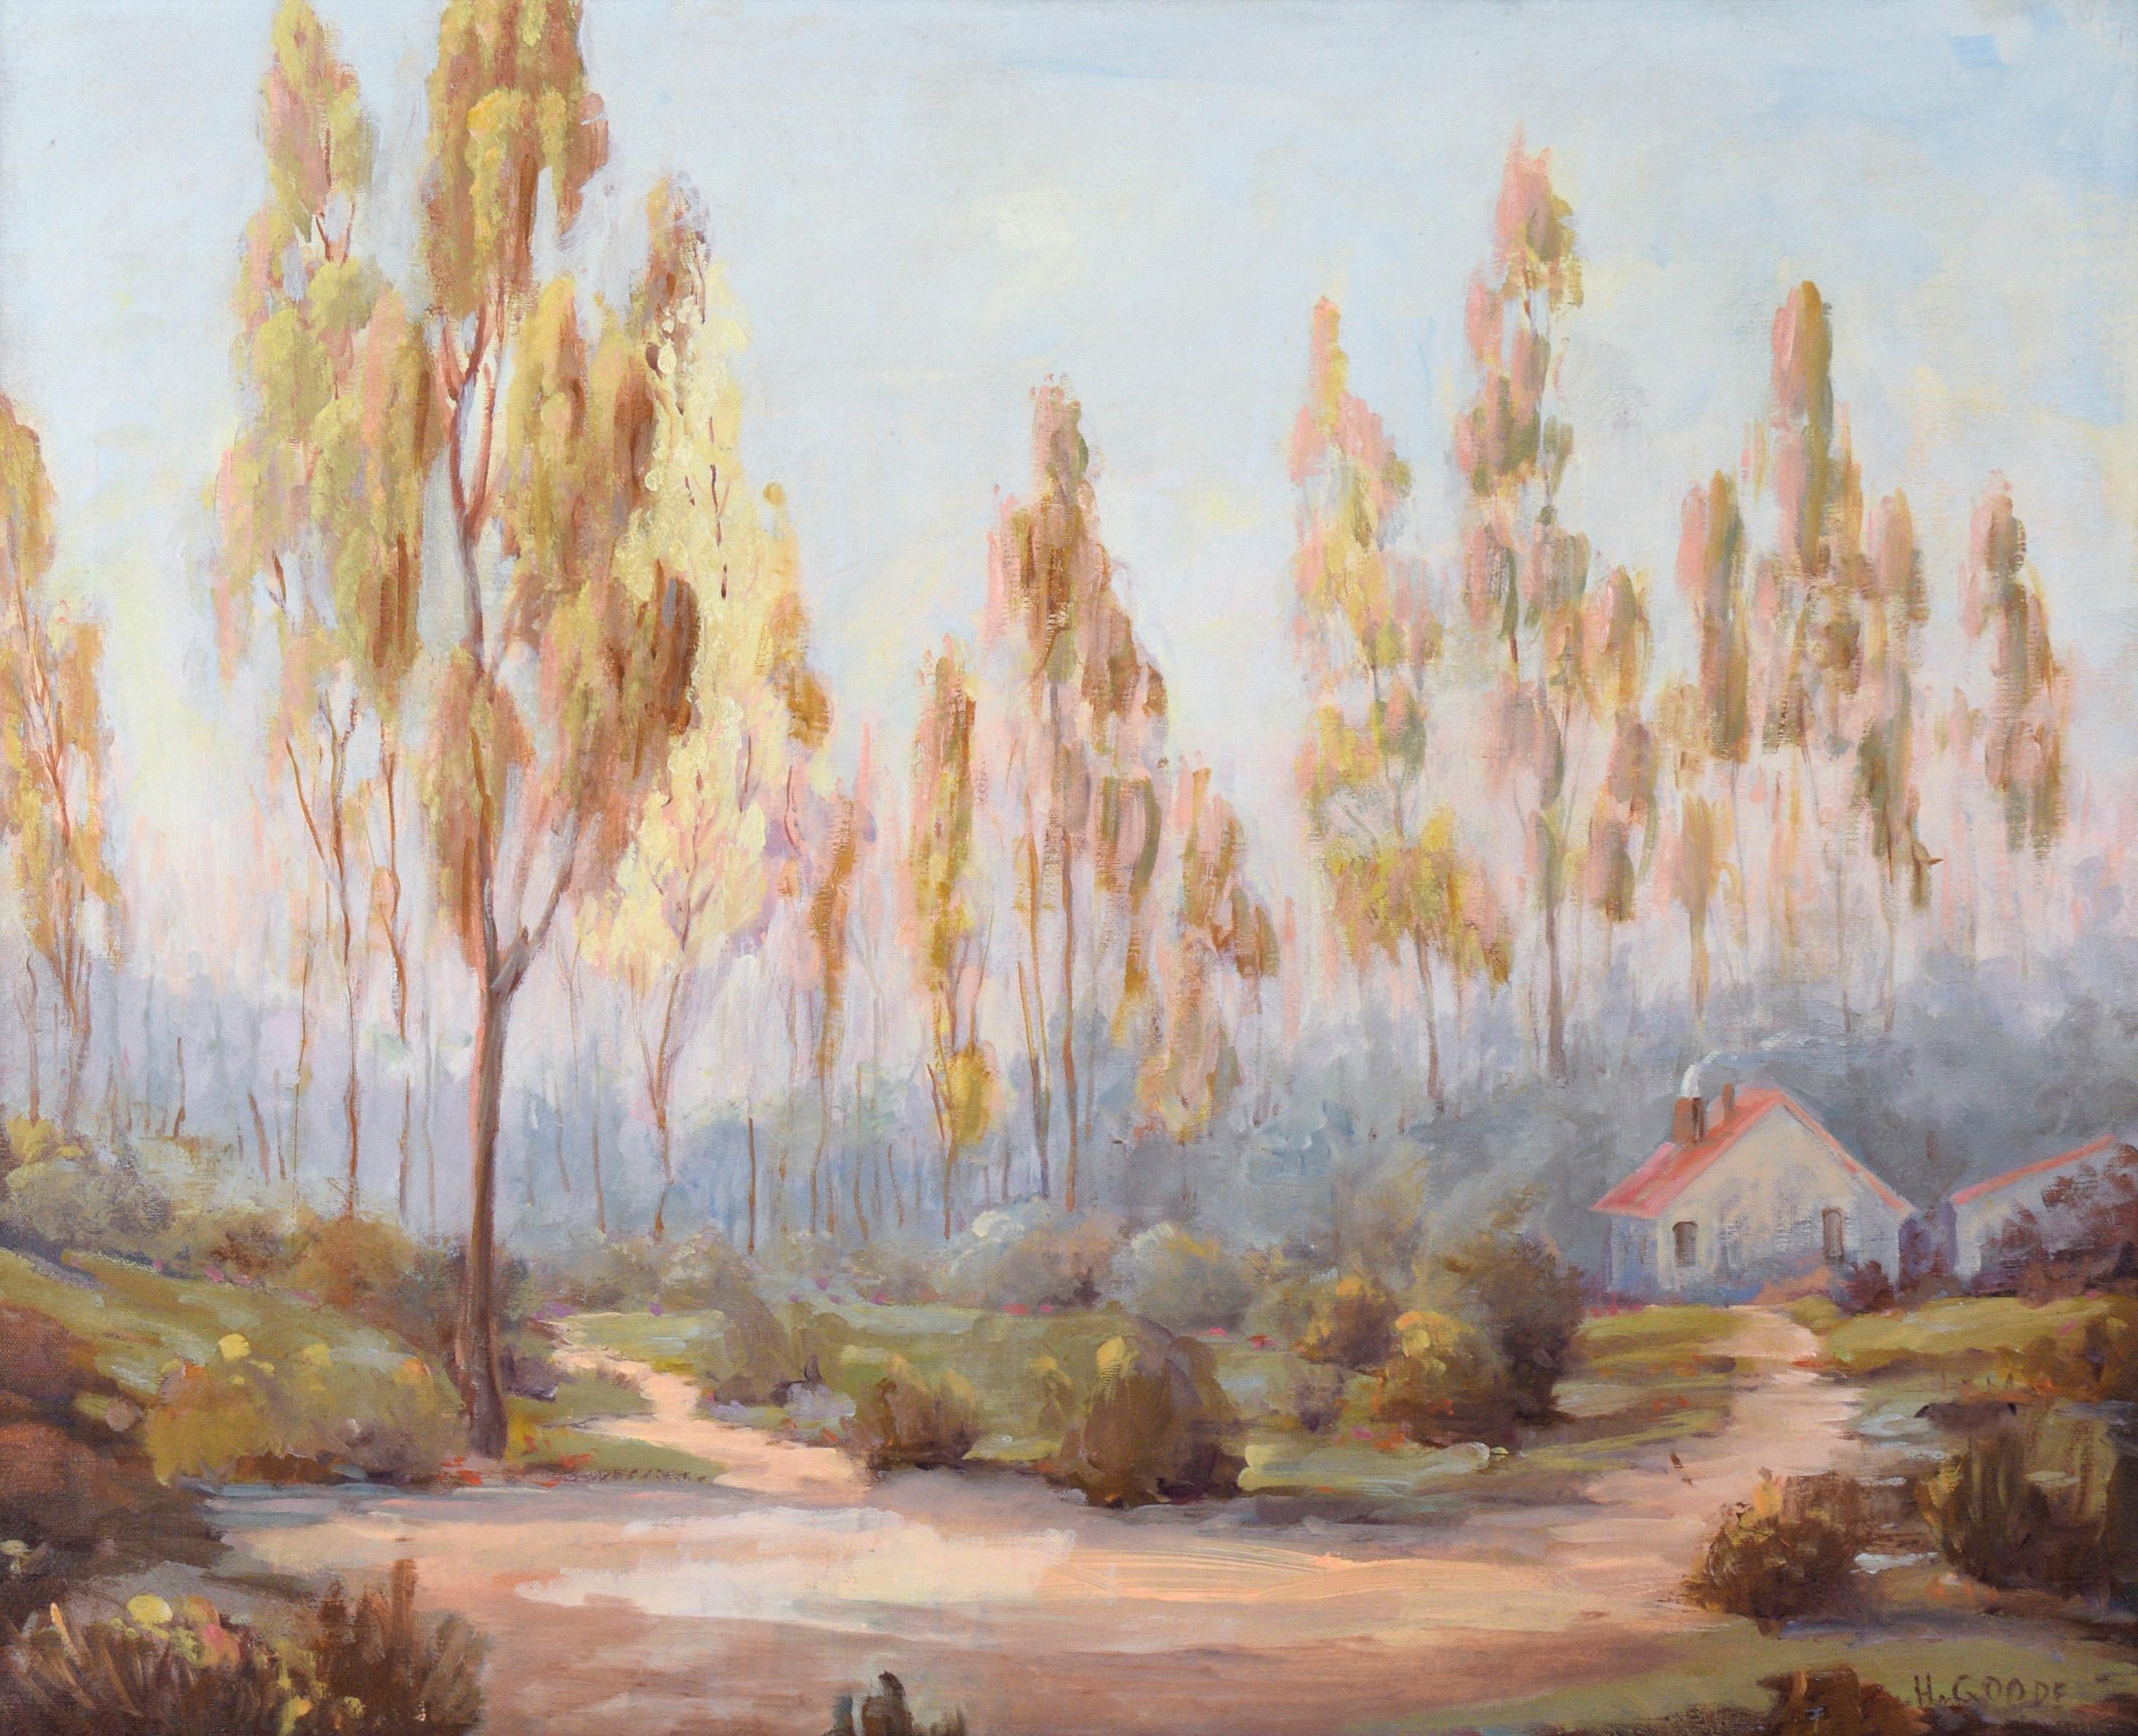 Country House in Eucalyptus Grove - California Landscape in Oil on Canvas - Painting by Henry B Goode